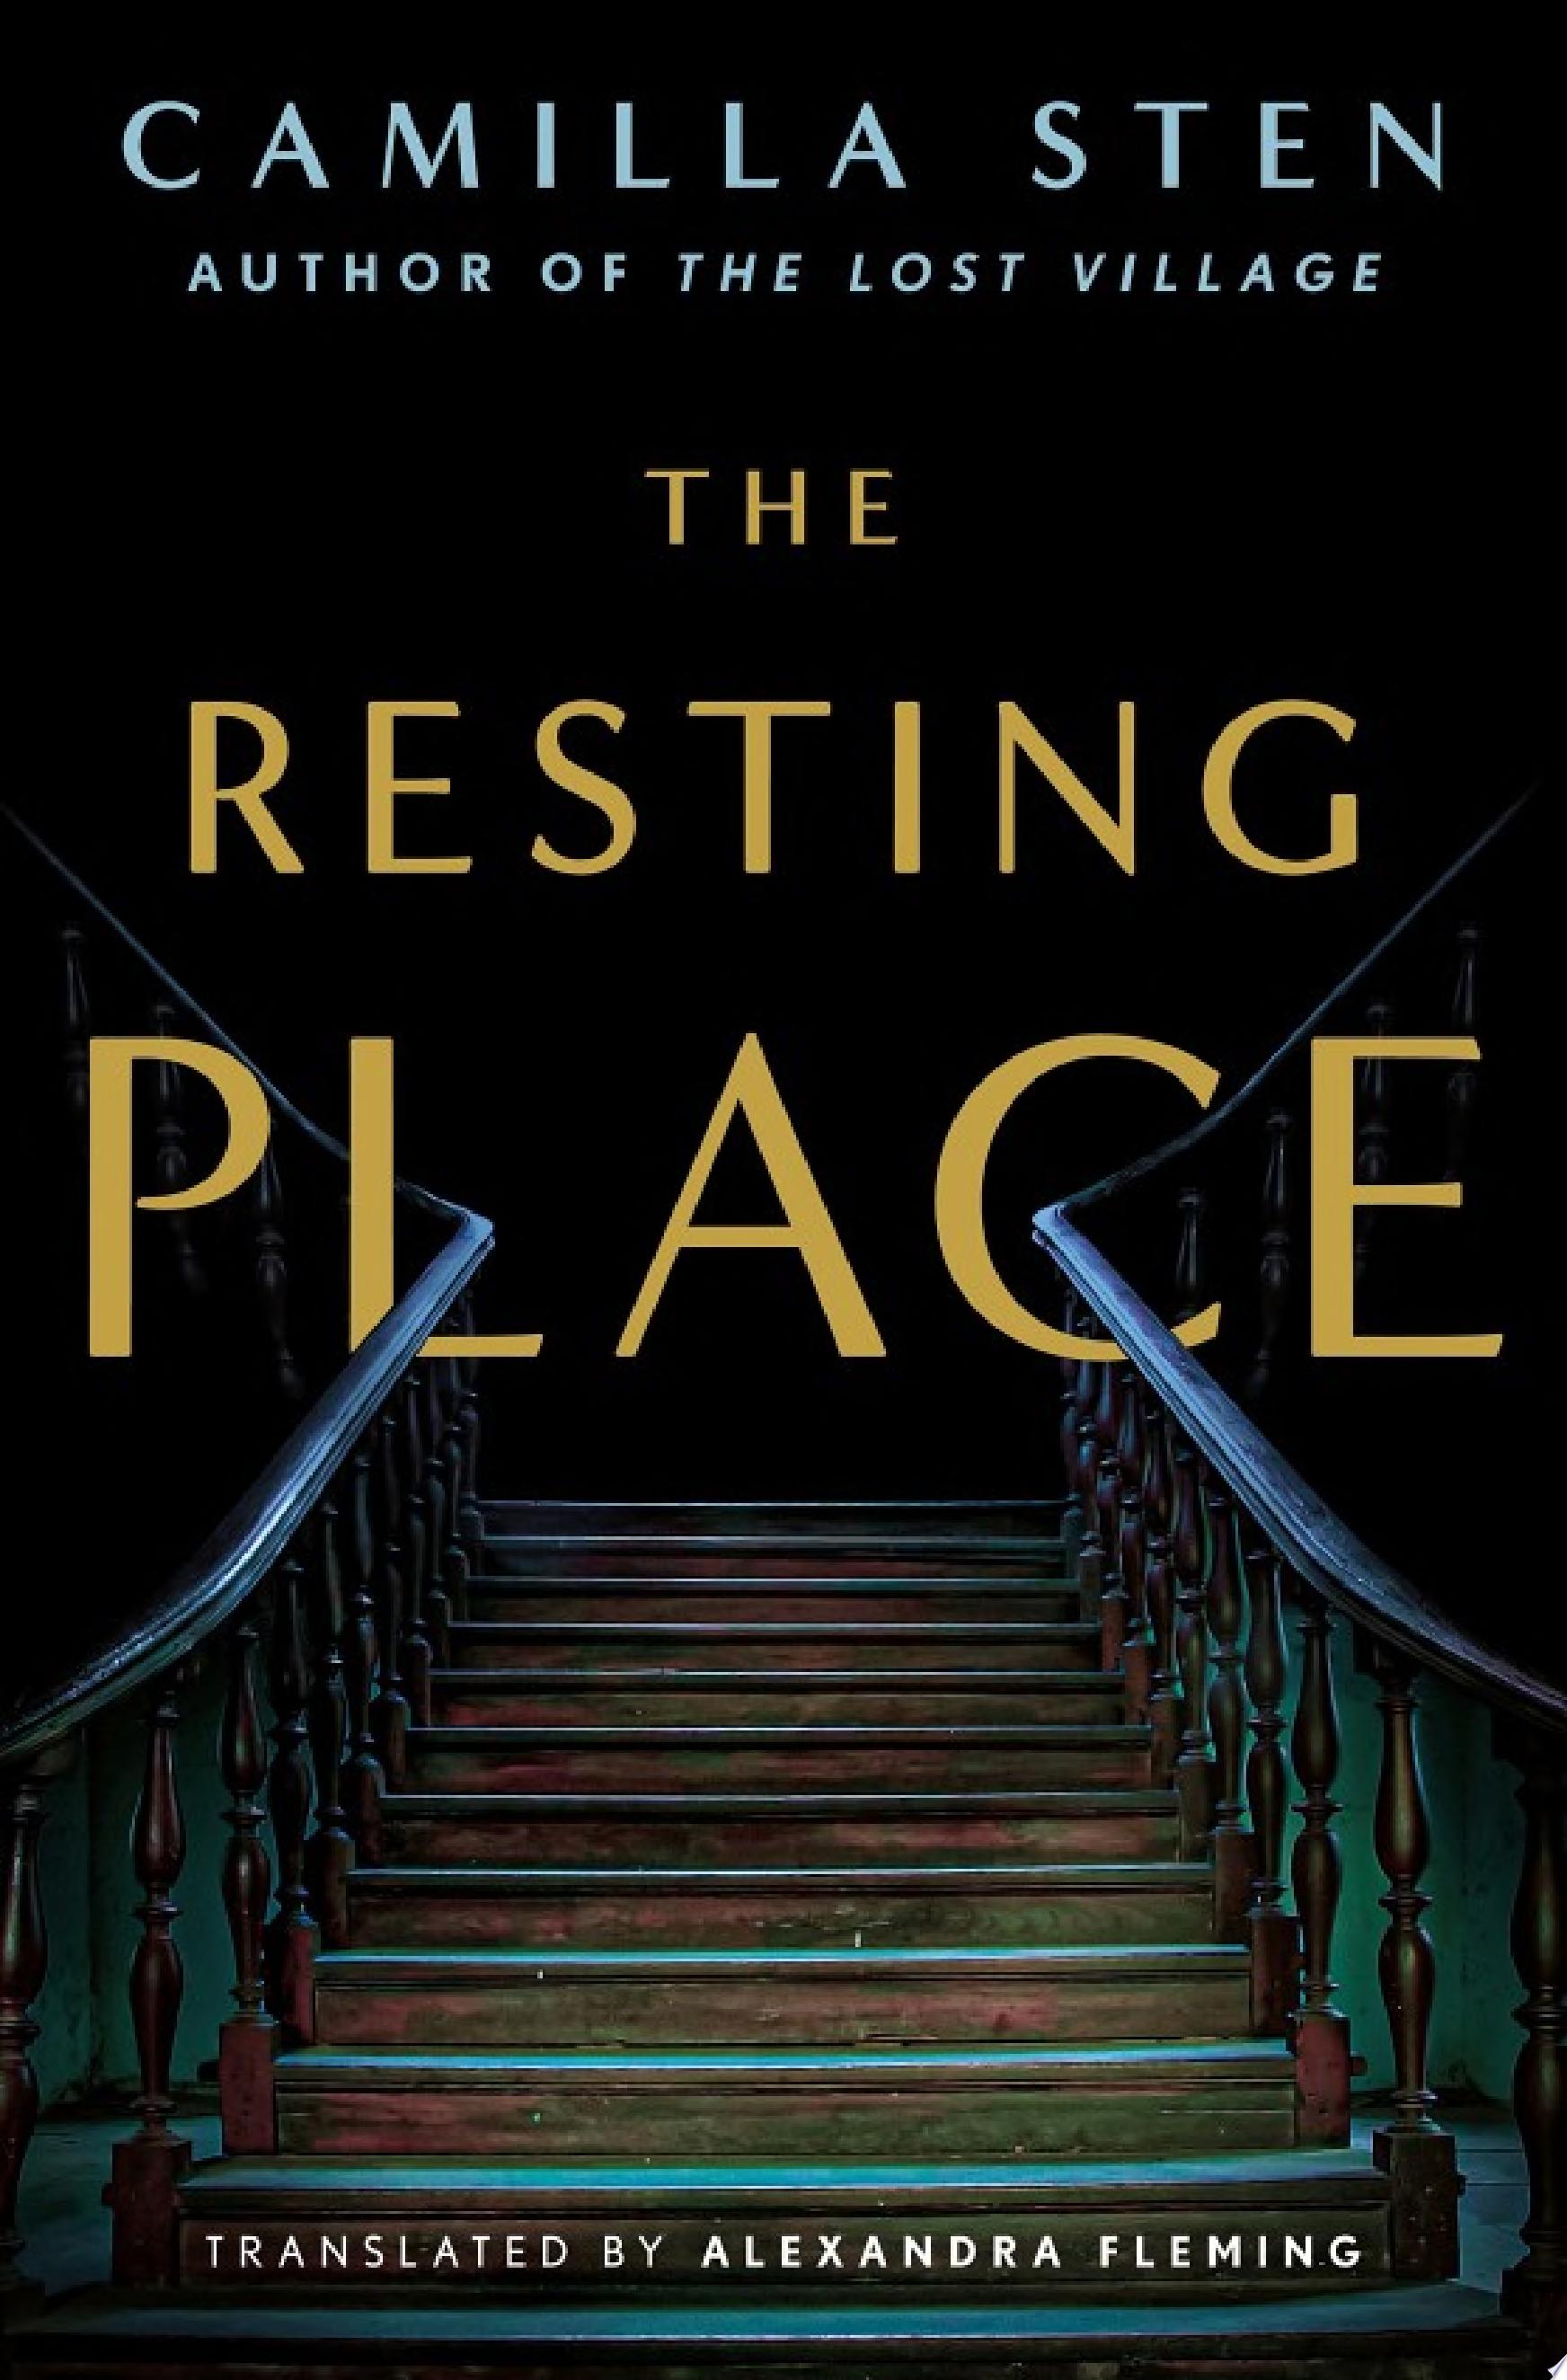 Image for "The Resting Place"